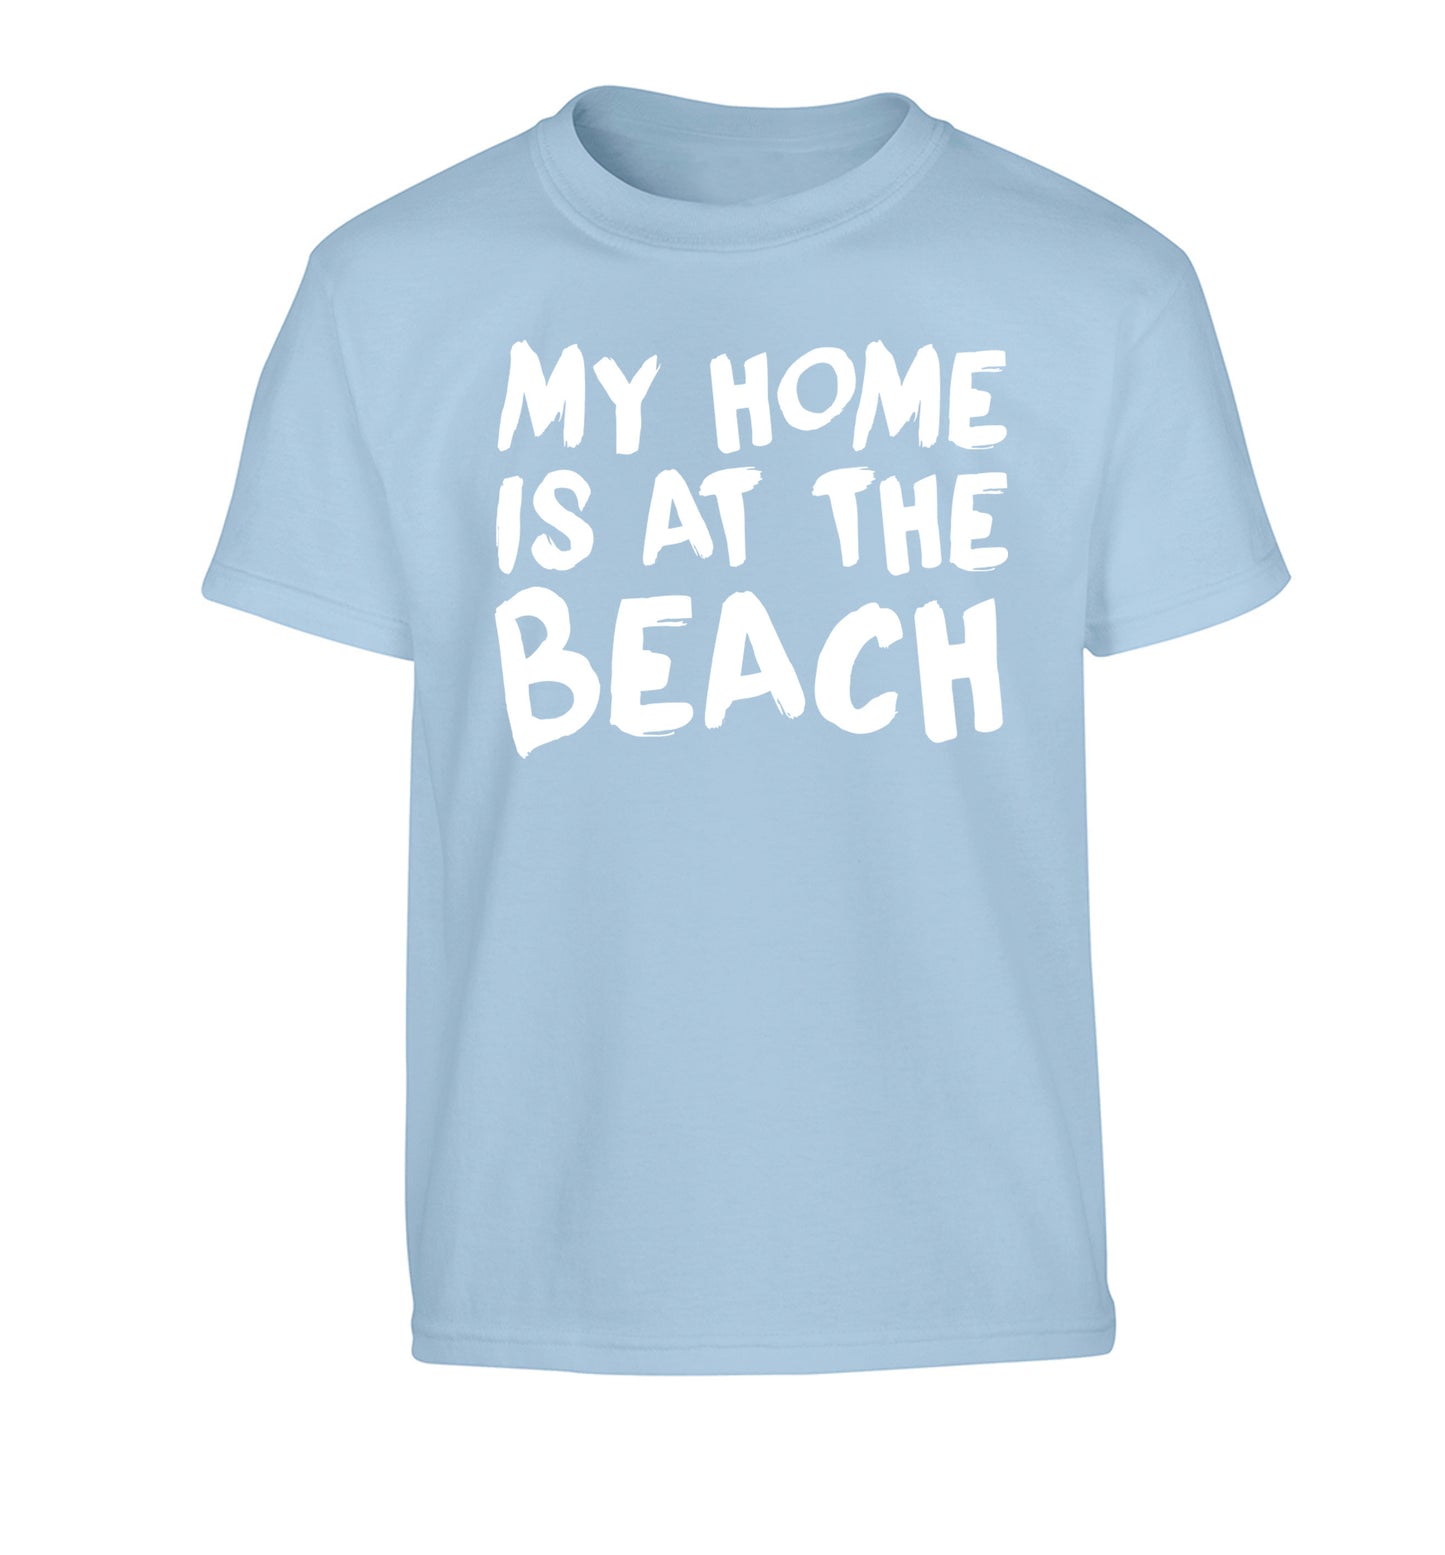 My home is at the beach Children's light blue Tshirt 12-14 Years